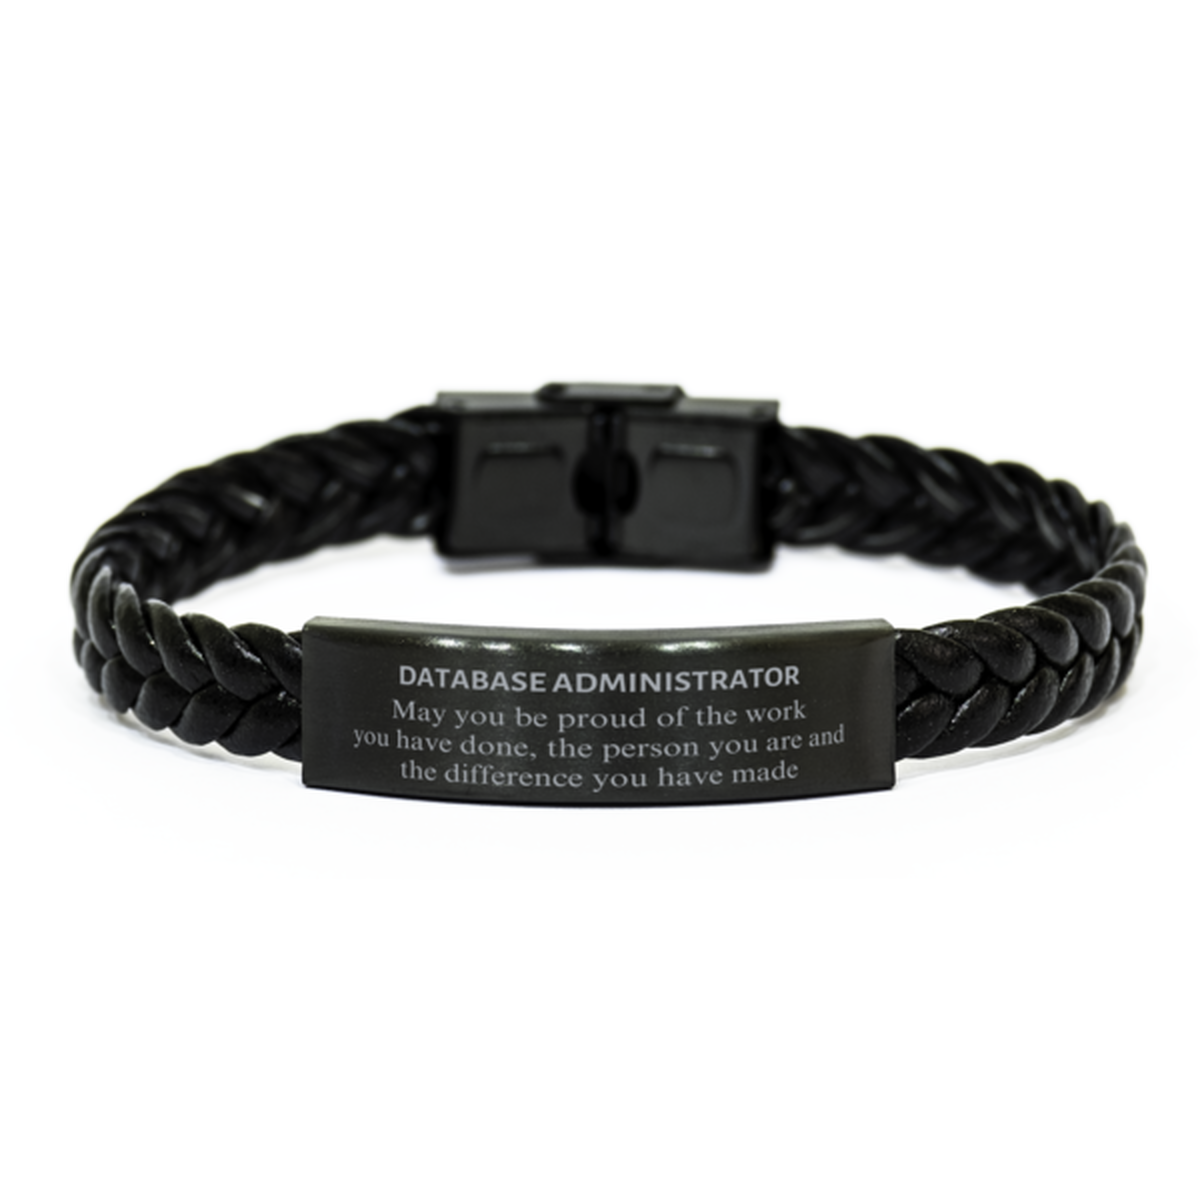 Database Administrator May you be proud of the work you have done, Retirement Database Administrator Braided Leather Bracelet for Colleague Appreciation Gifts Amazing for Database Administrator